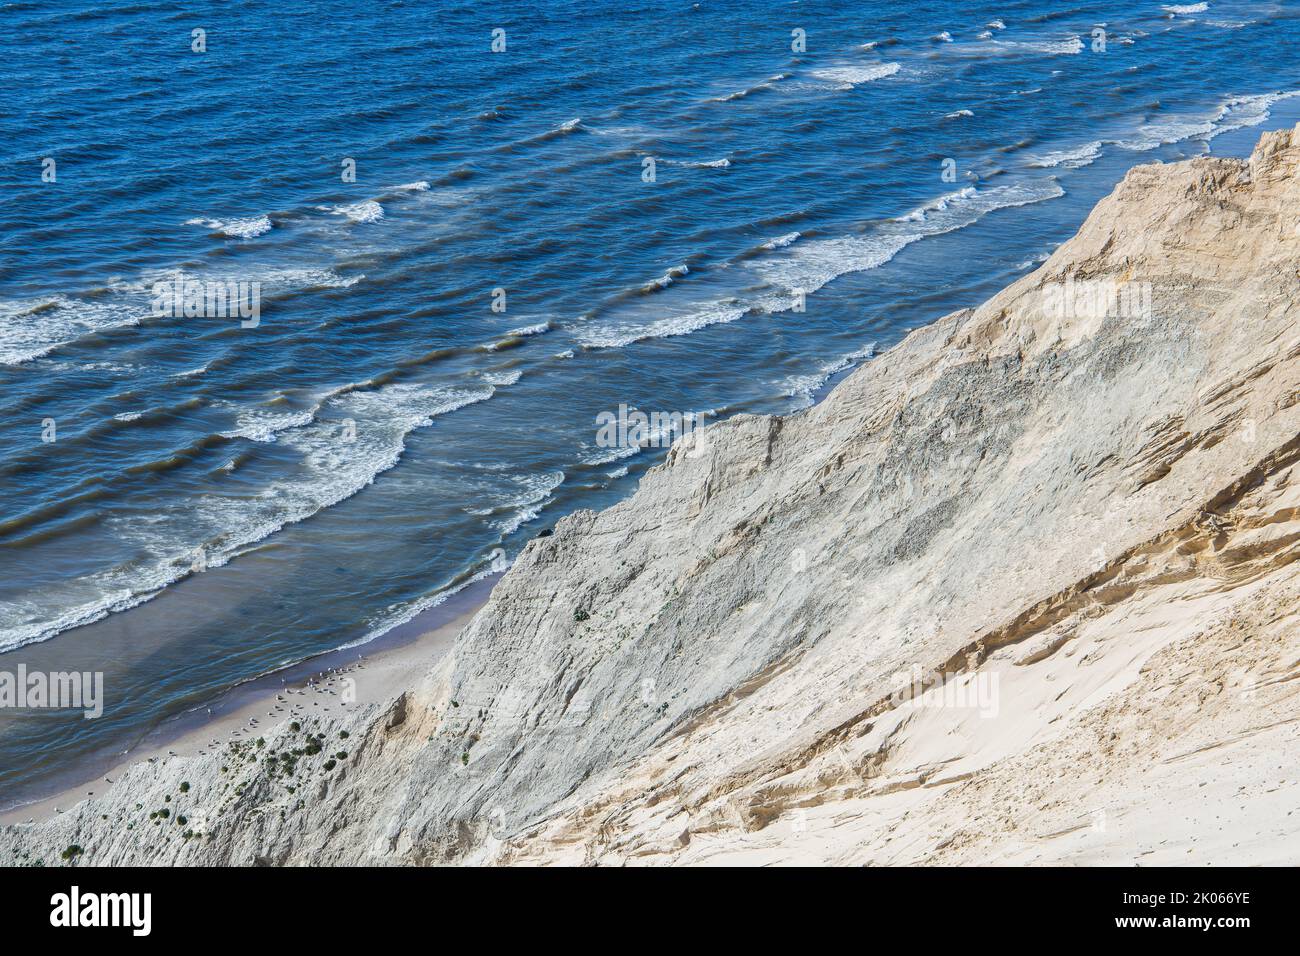 The iconic coast line in Denmark with rocks, sand dunes and the ocean Stock Photo